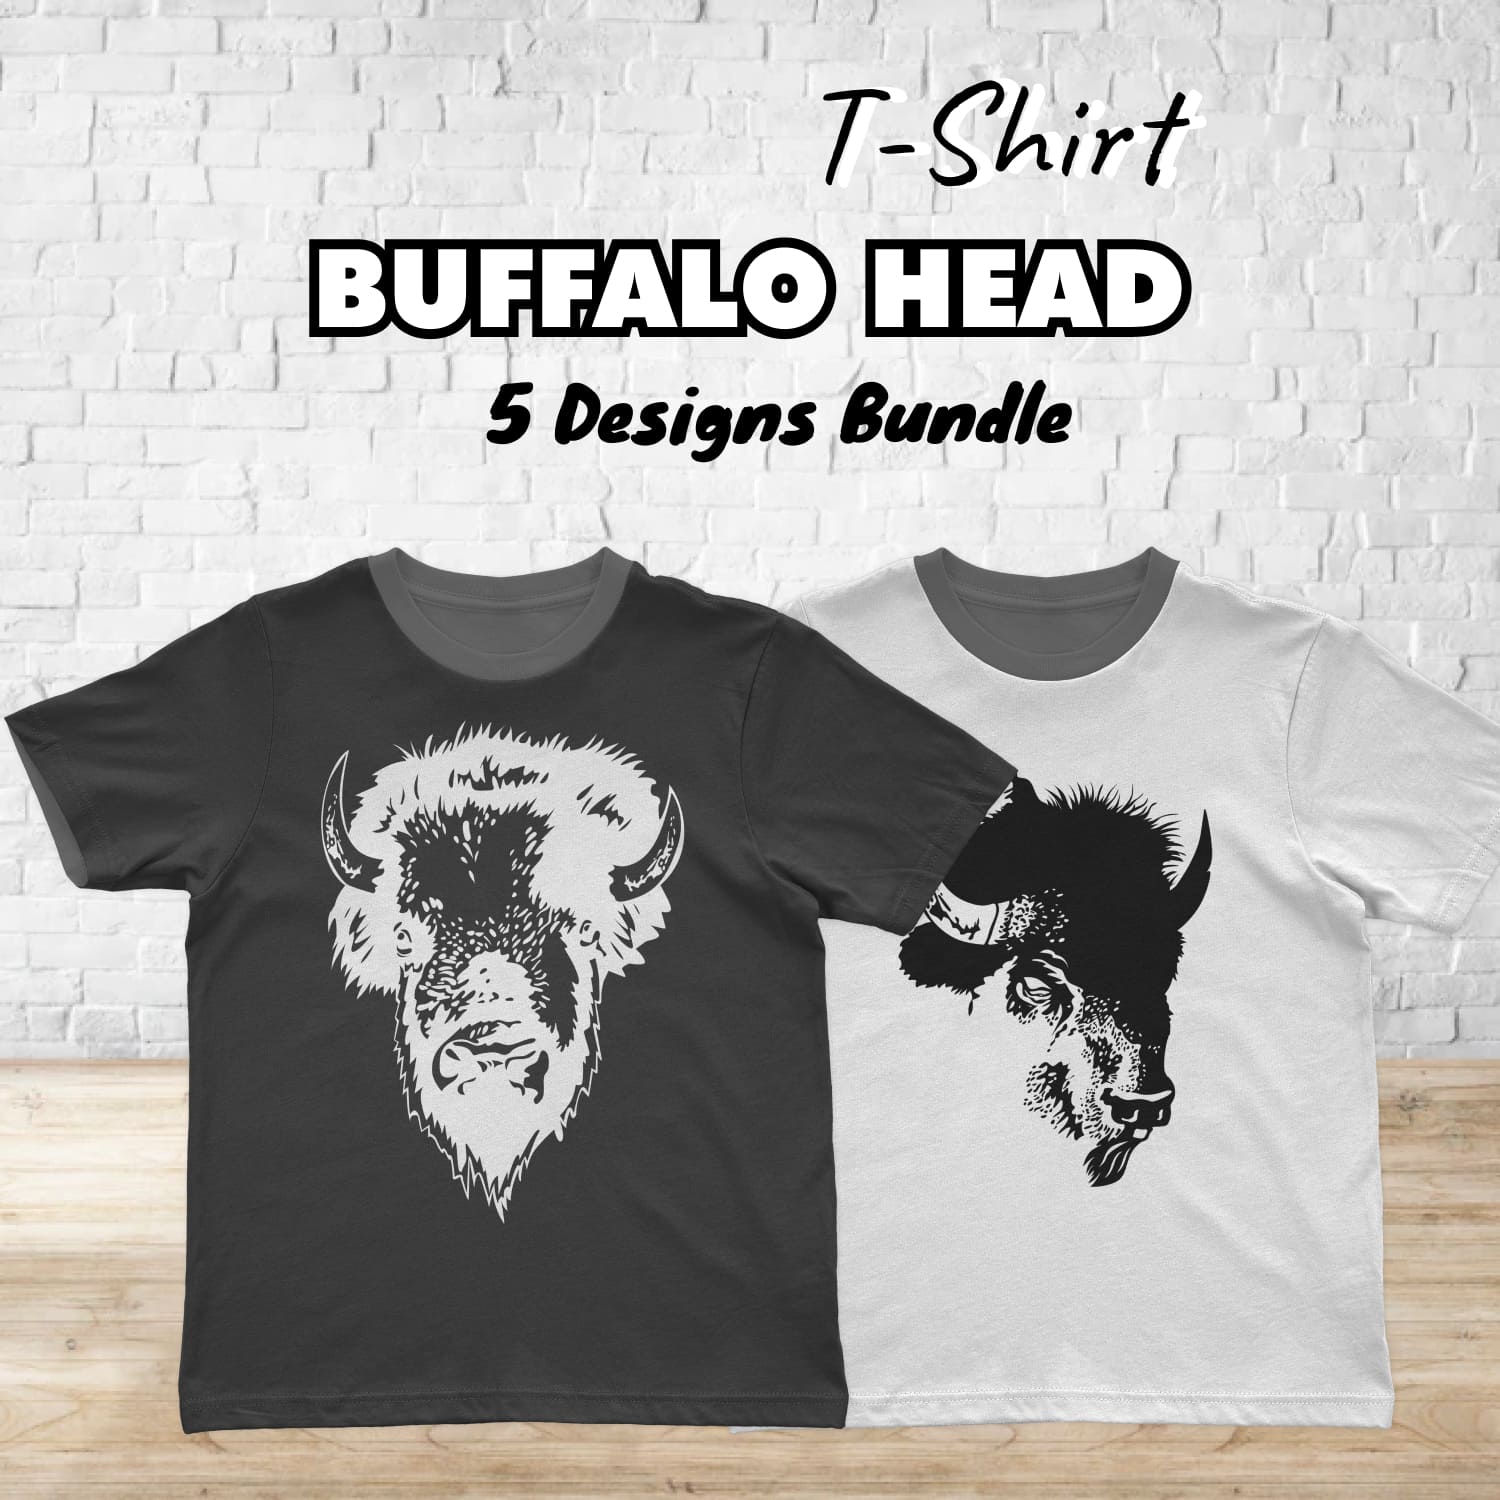 Images with buffalo head.